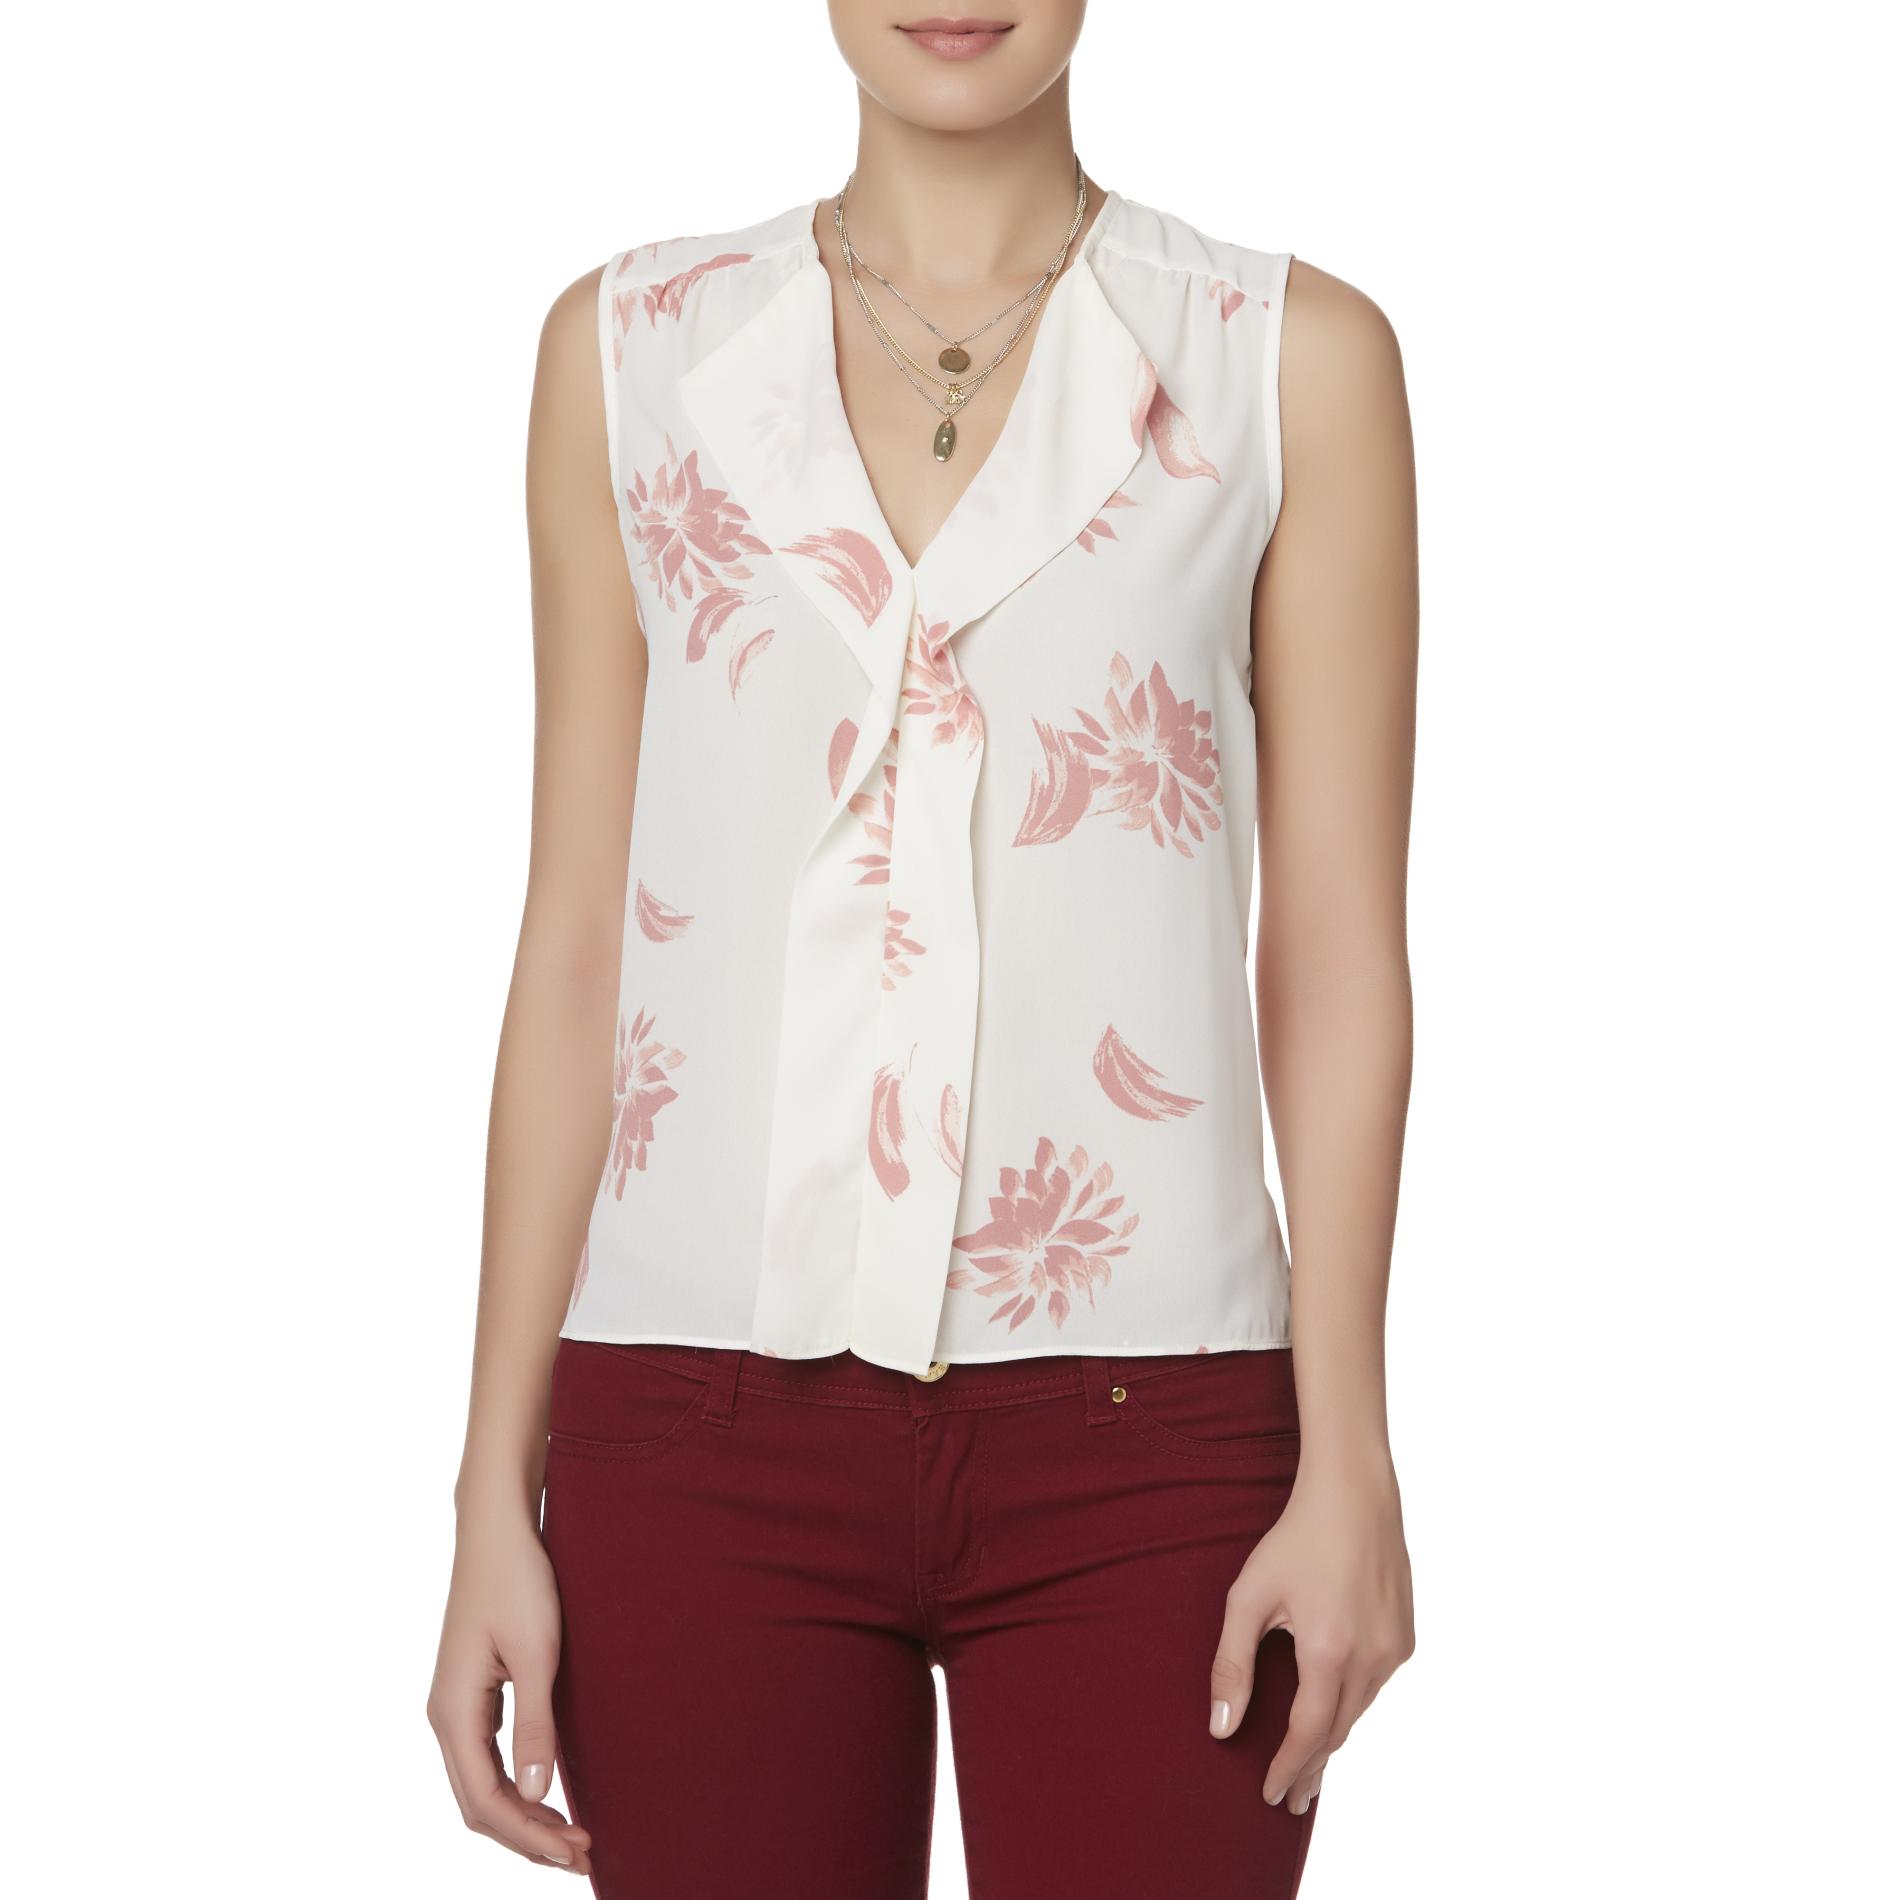 Simply Styled Petite's Sleeveless Blouse - Floral